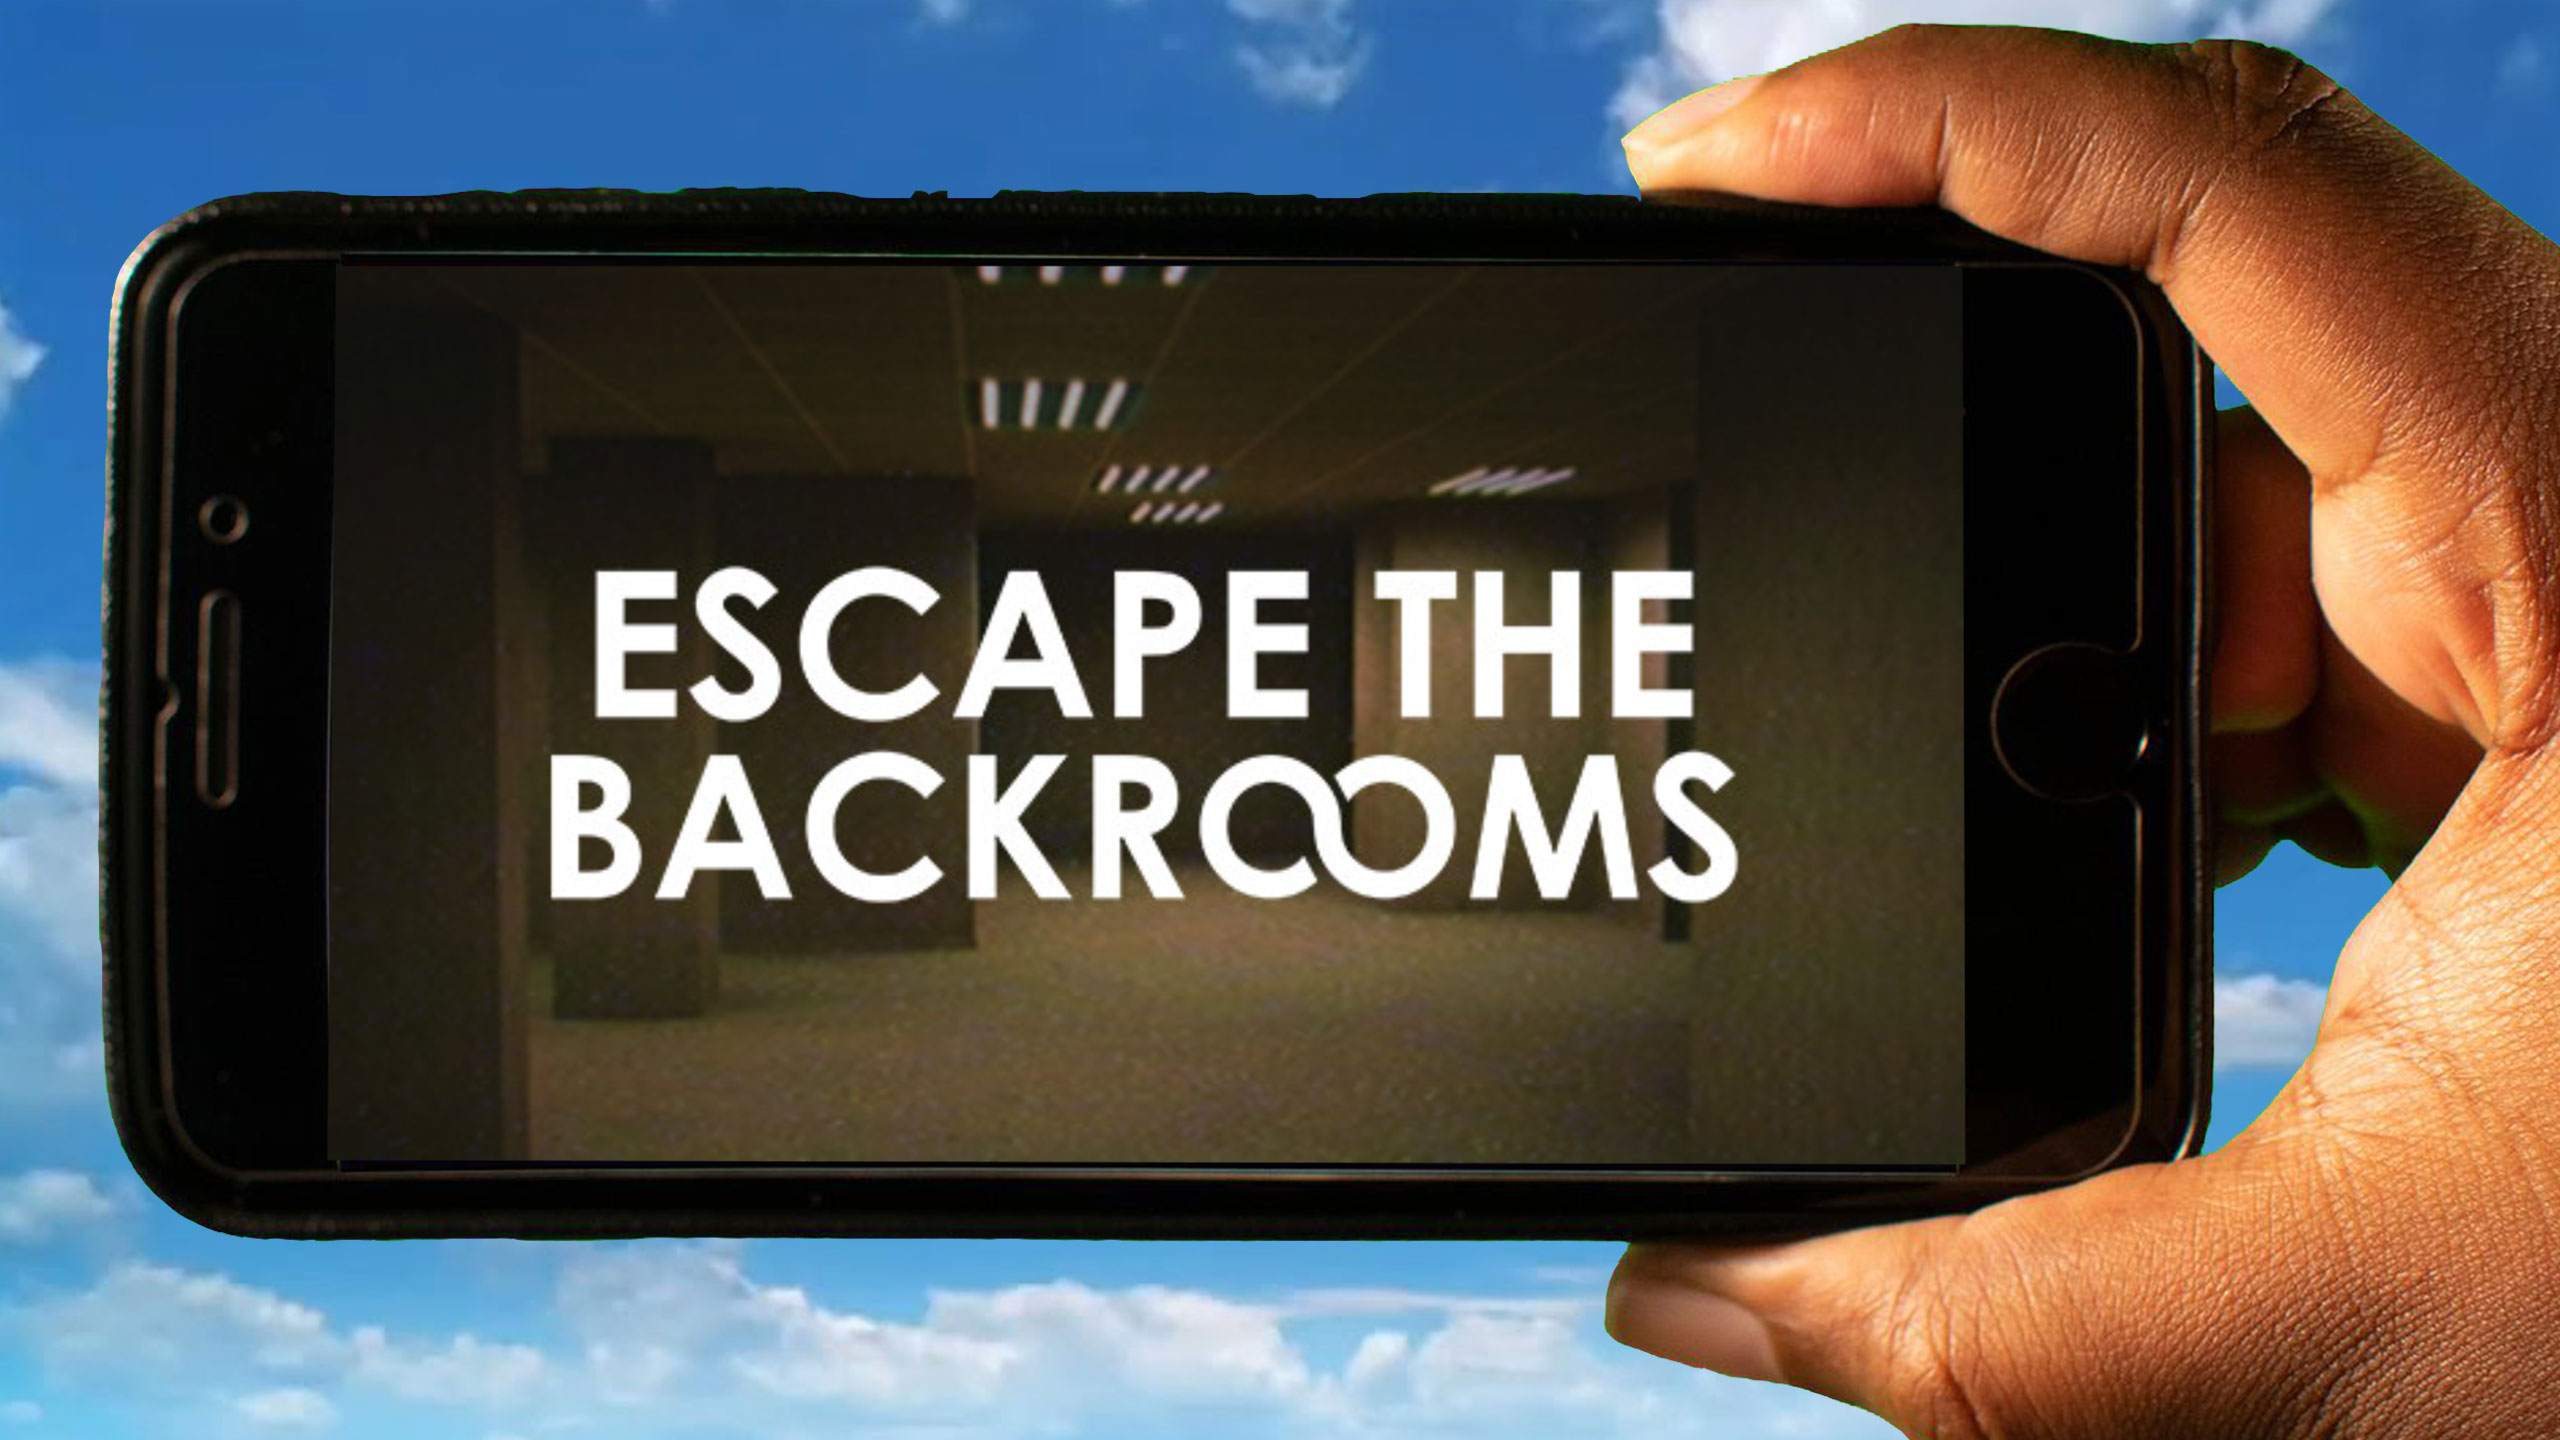 Where Can I Play Escape The Backrooms